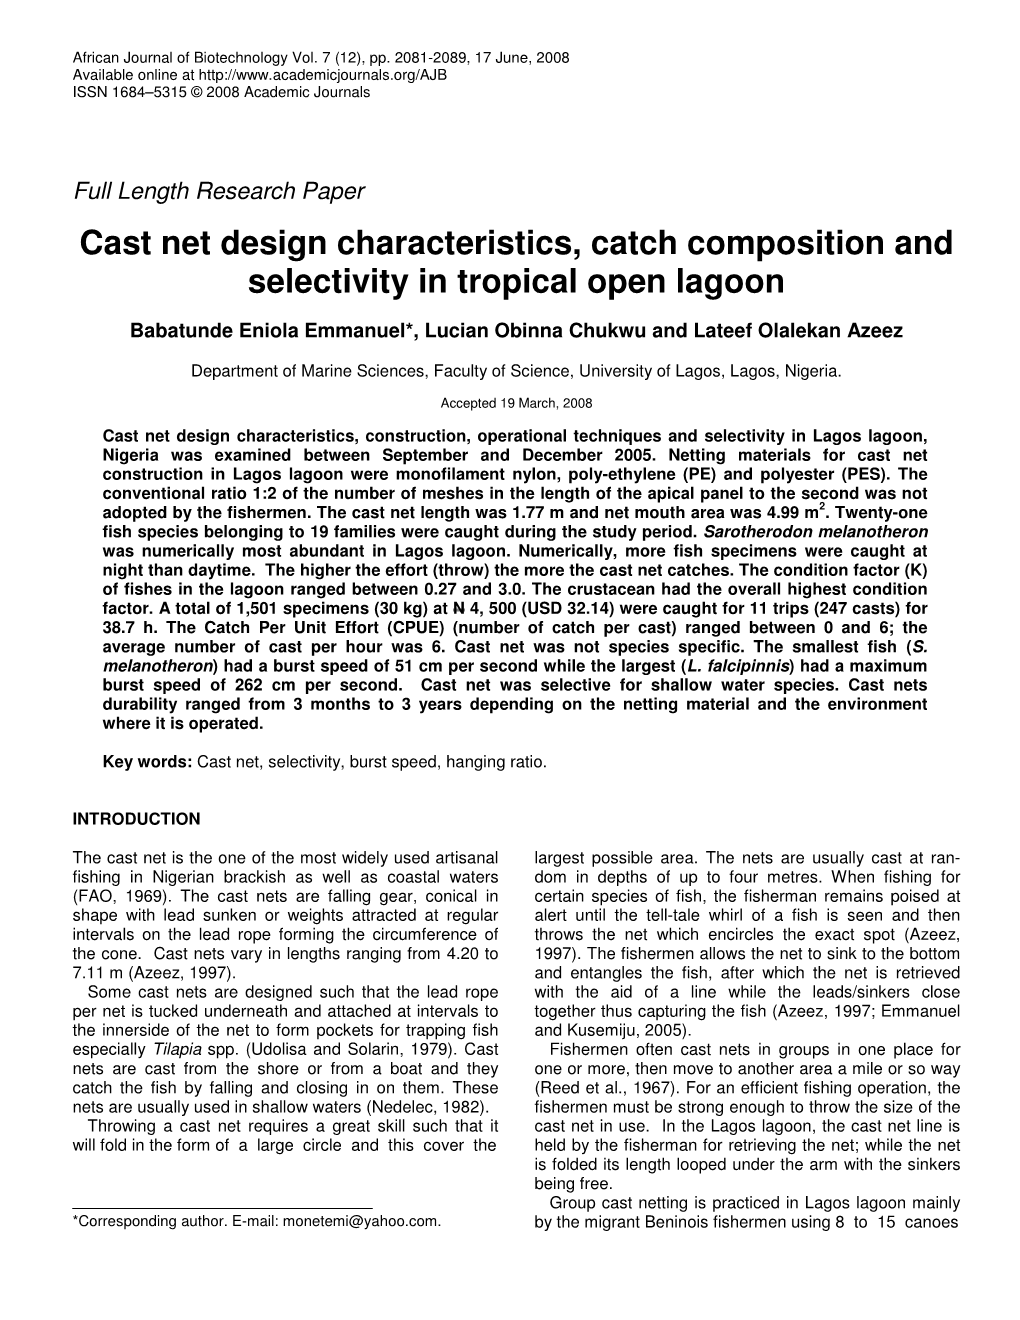 Cast Net Design Characteristics, Catch Composition and Selectivity in Tropical Open Lagoon